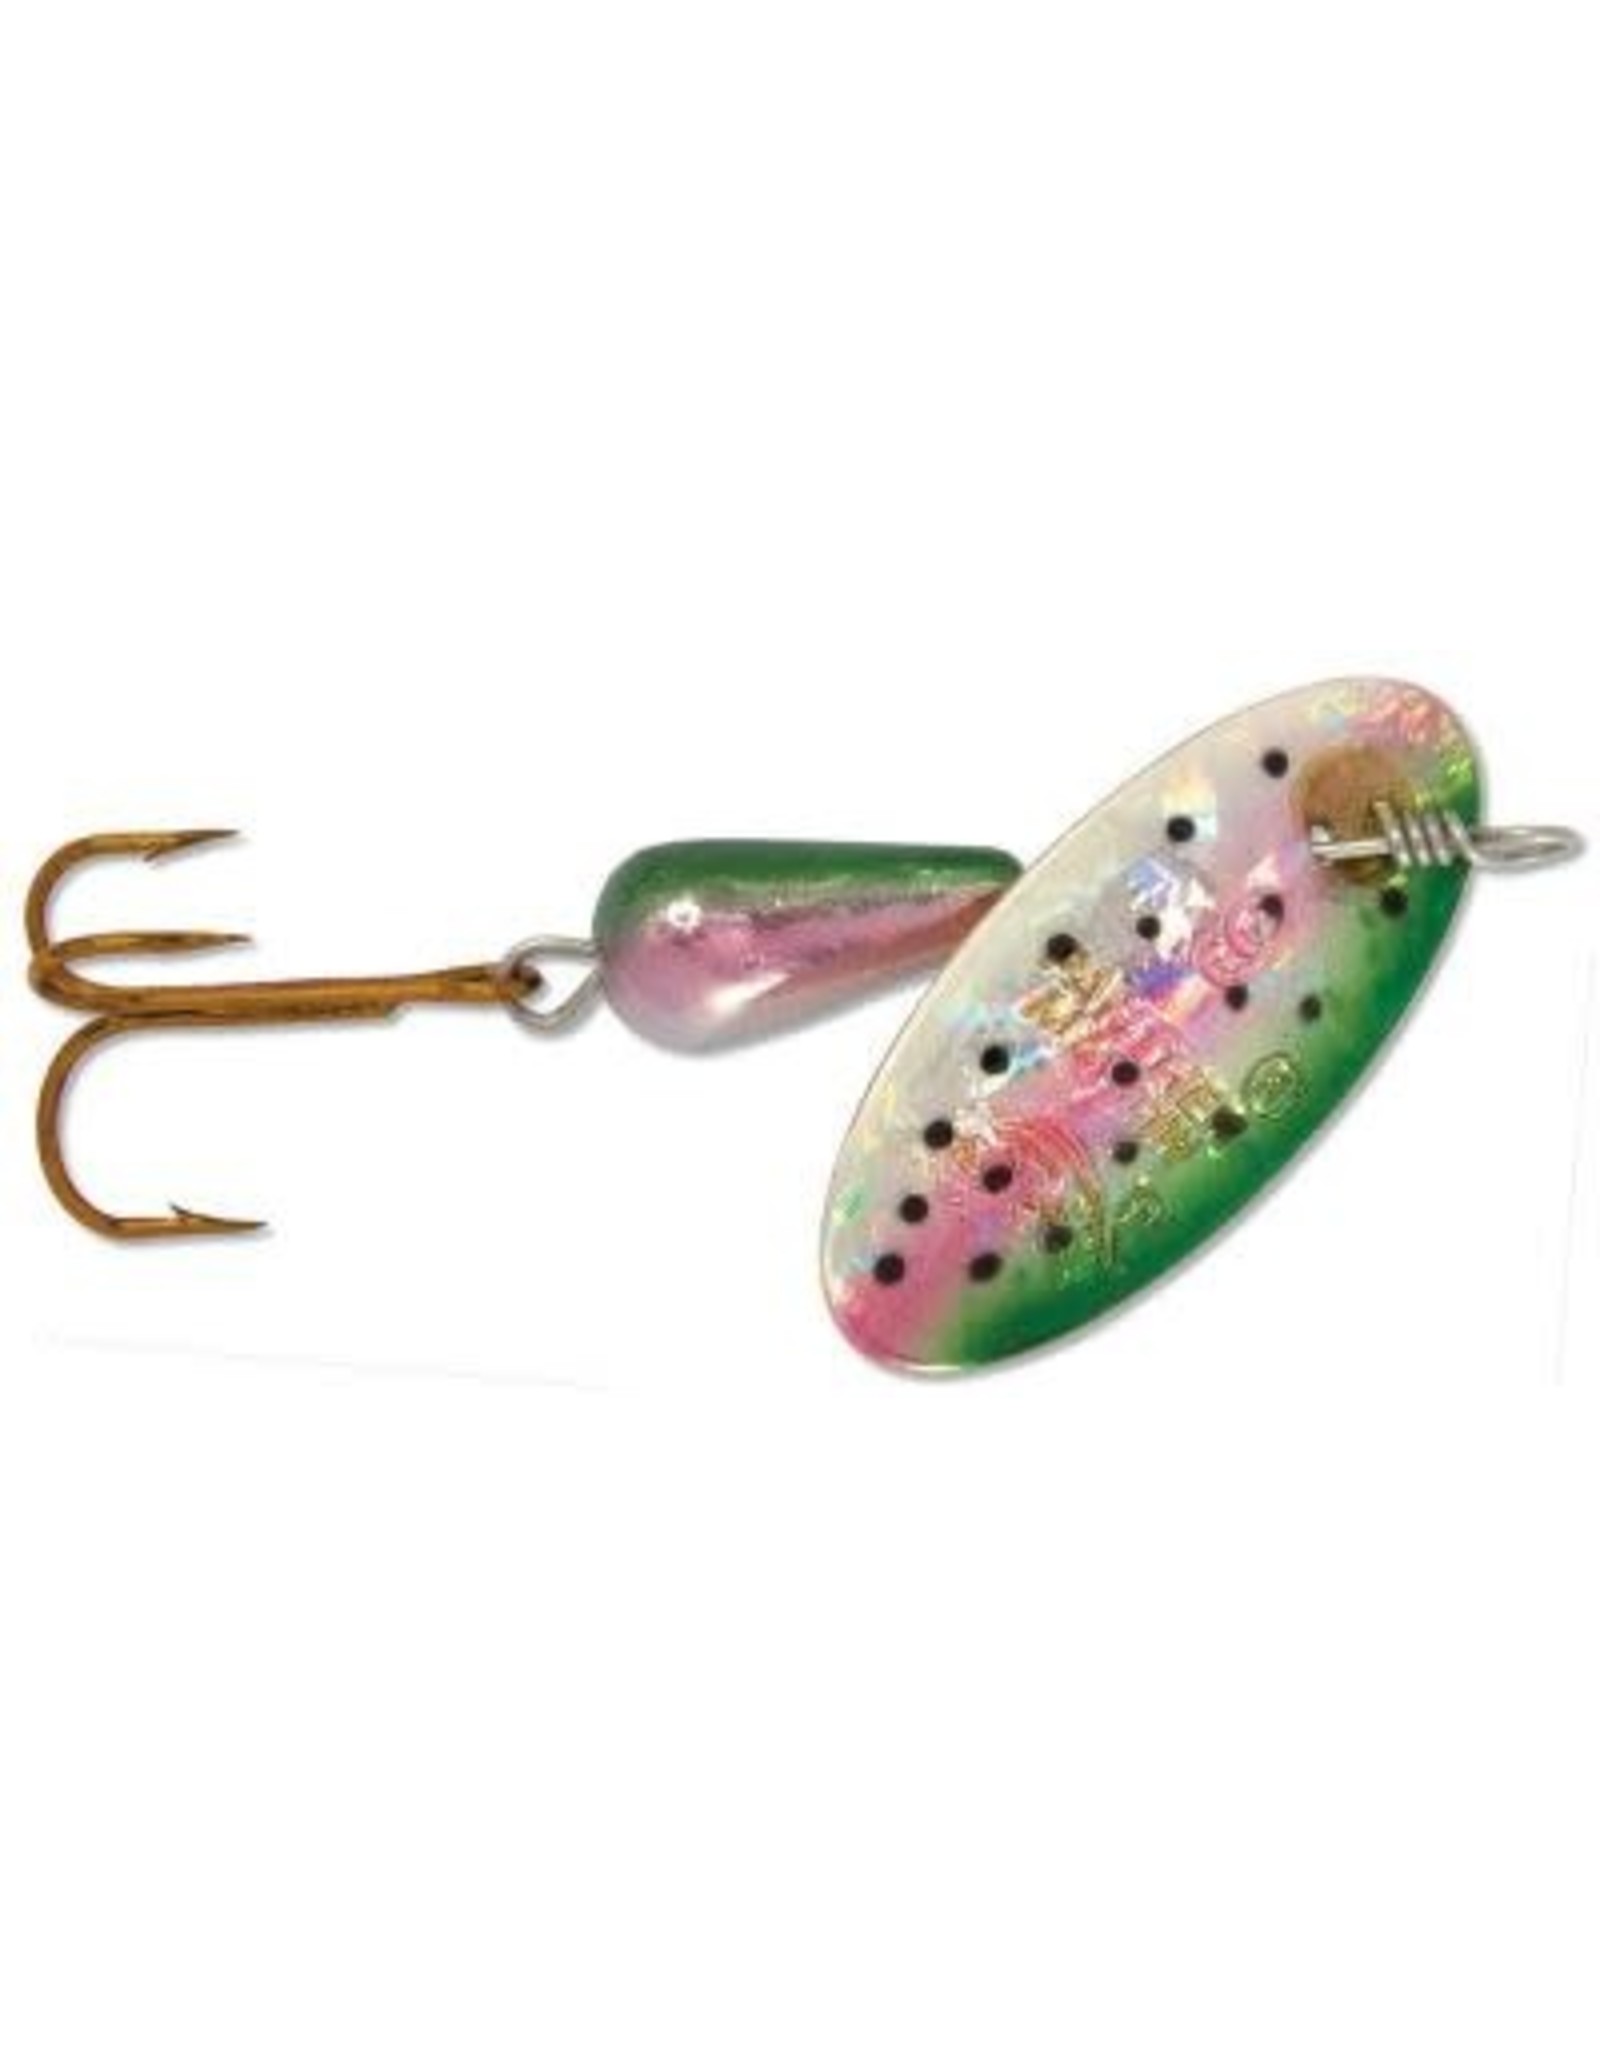 Panther Martin Inline Swivel Spinner - Holographic Rainbow - 1/16 Oz